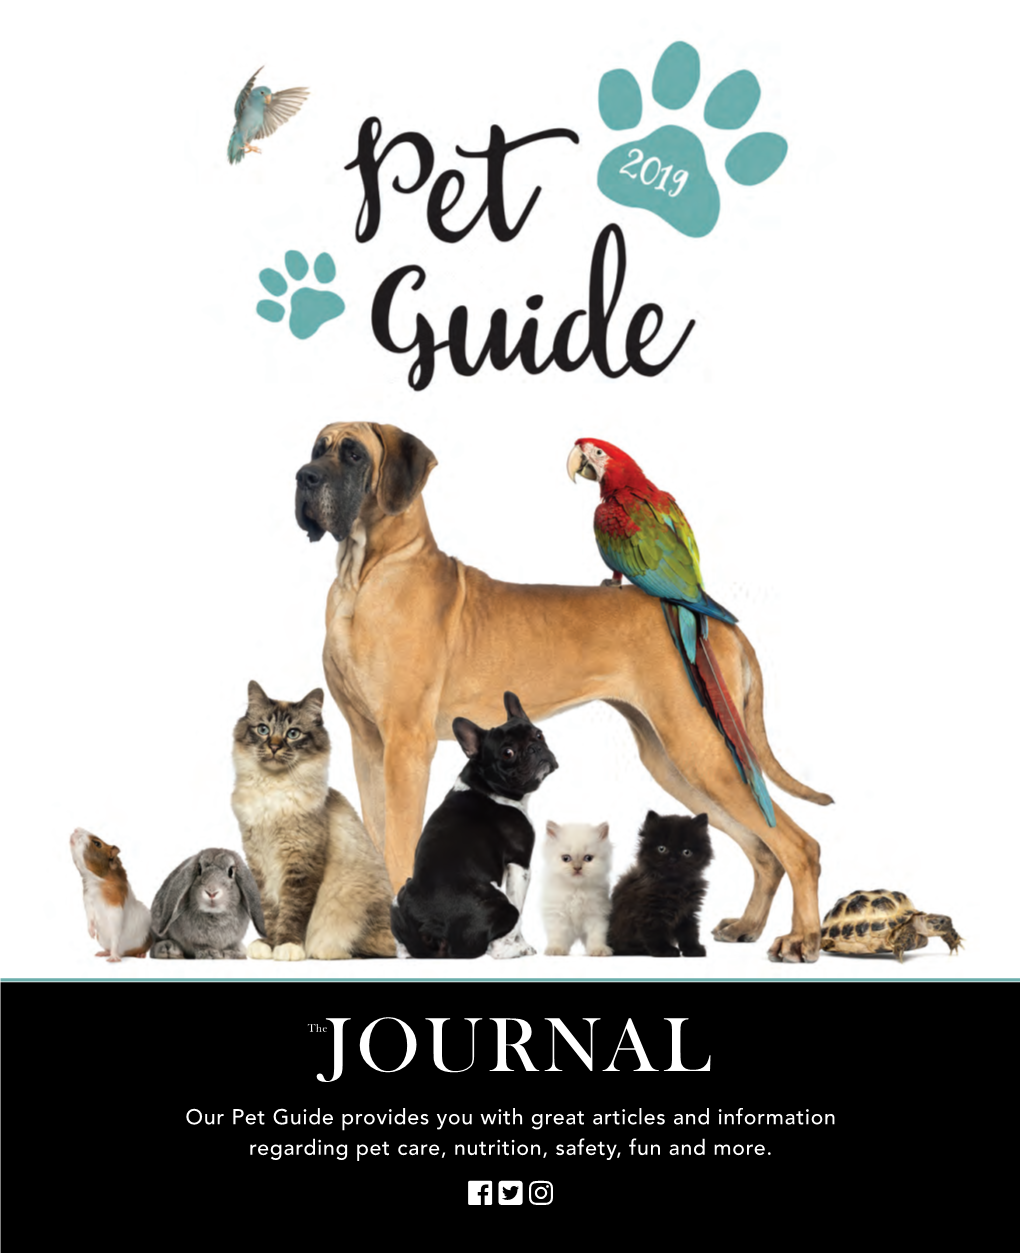 Pet Guide Provides You with Great Articles and Information Regarding Pet Care, Nutrition, Safety, Fun and More